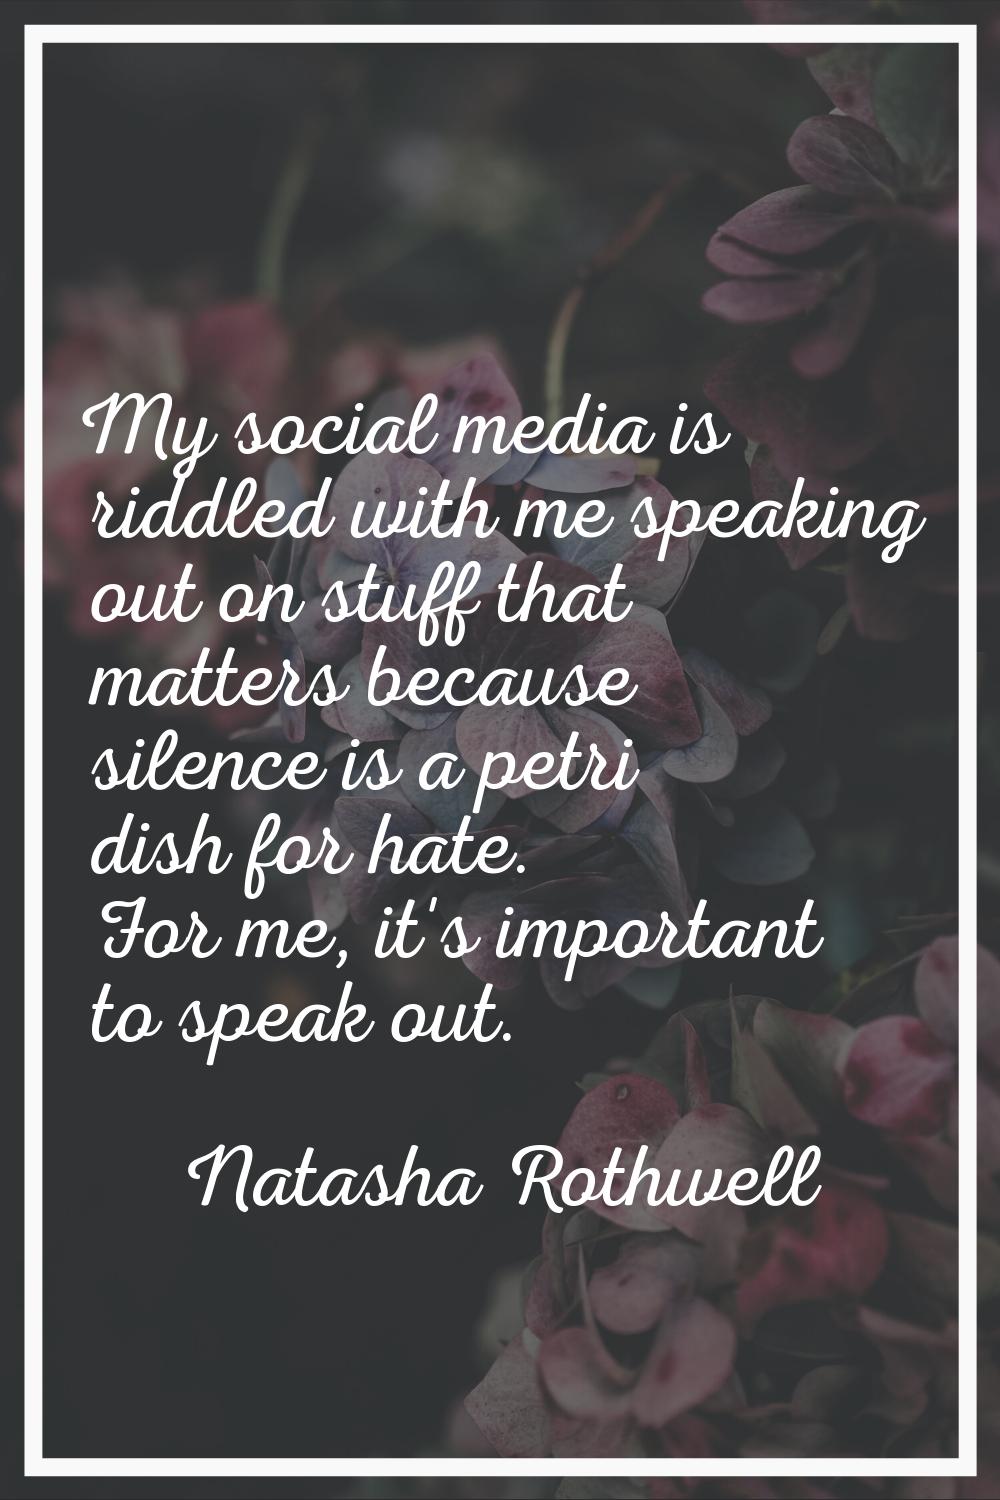 My social media is riddled with me speaking out on stuff that matters because silence is a petri di